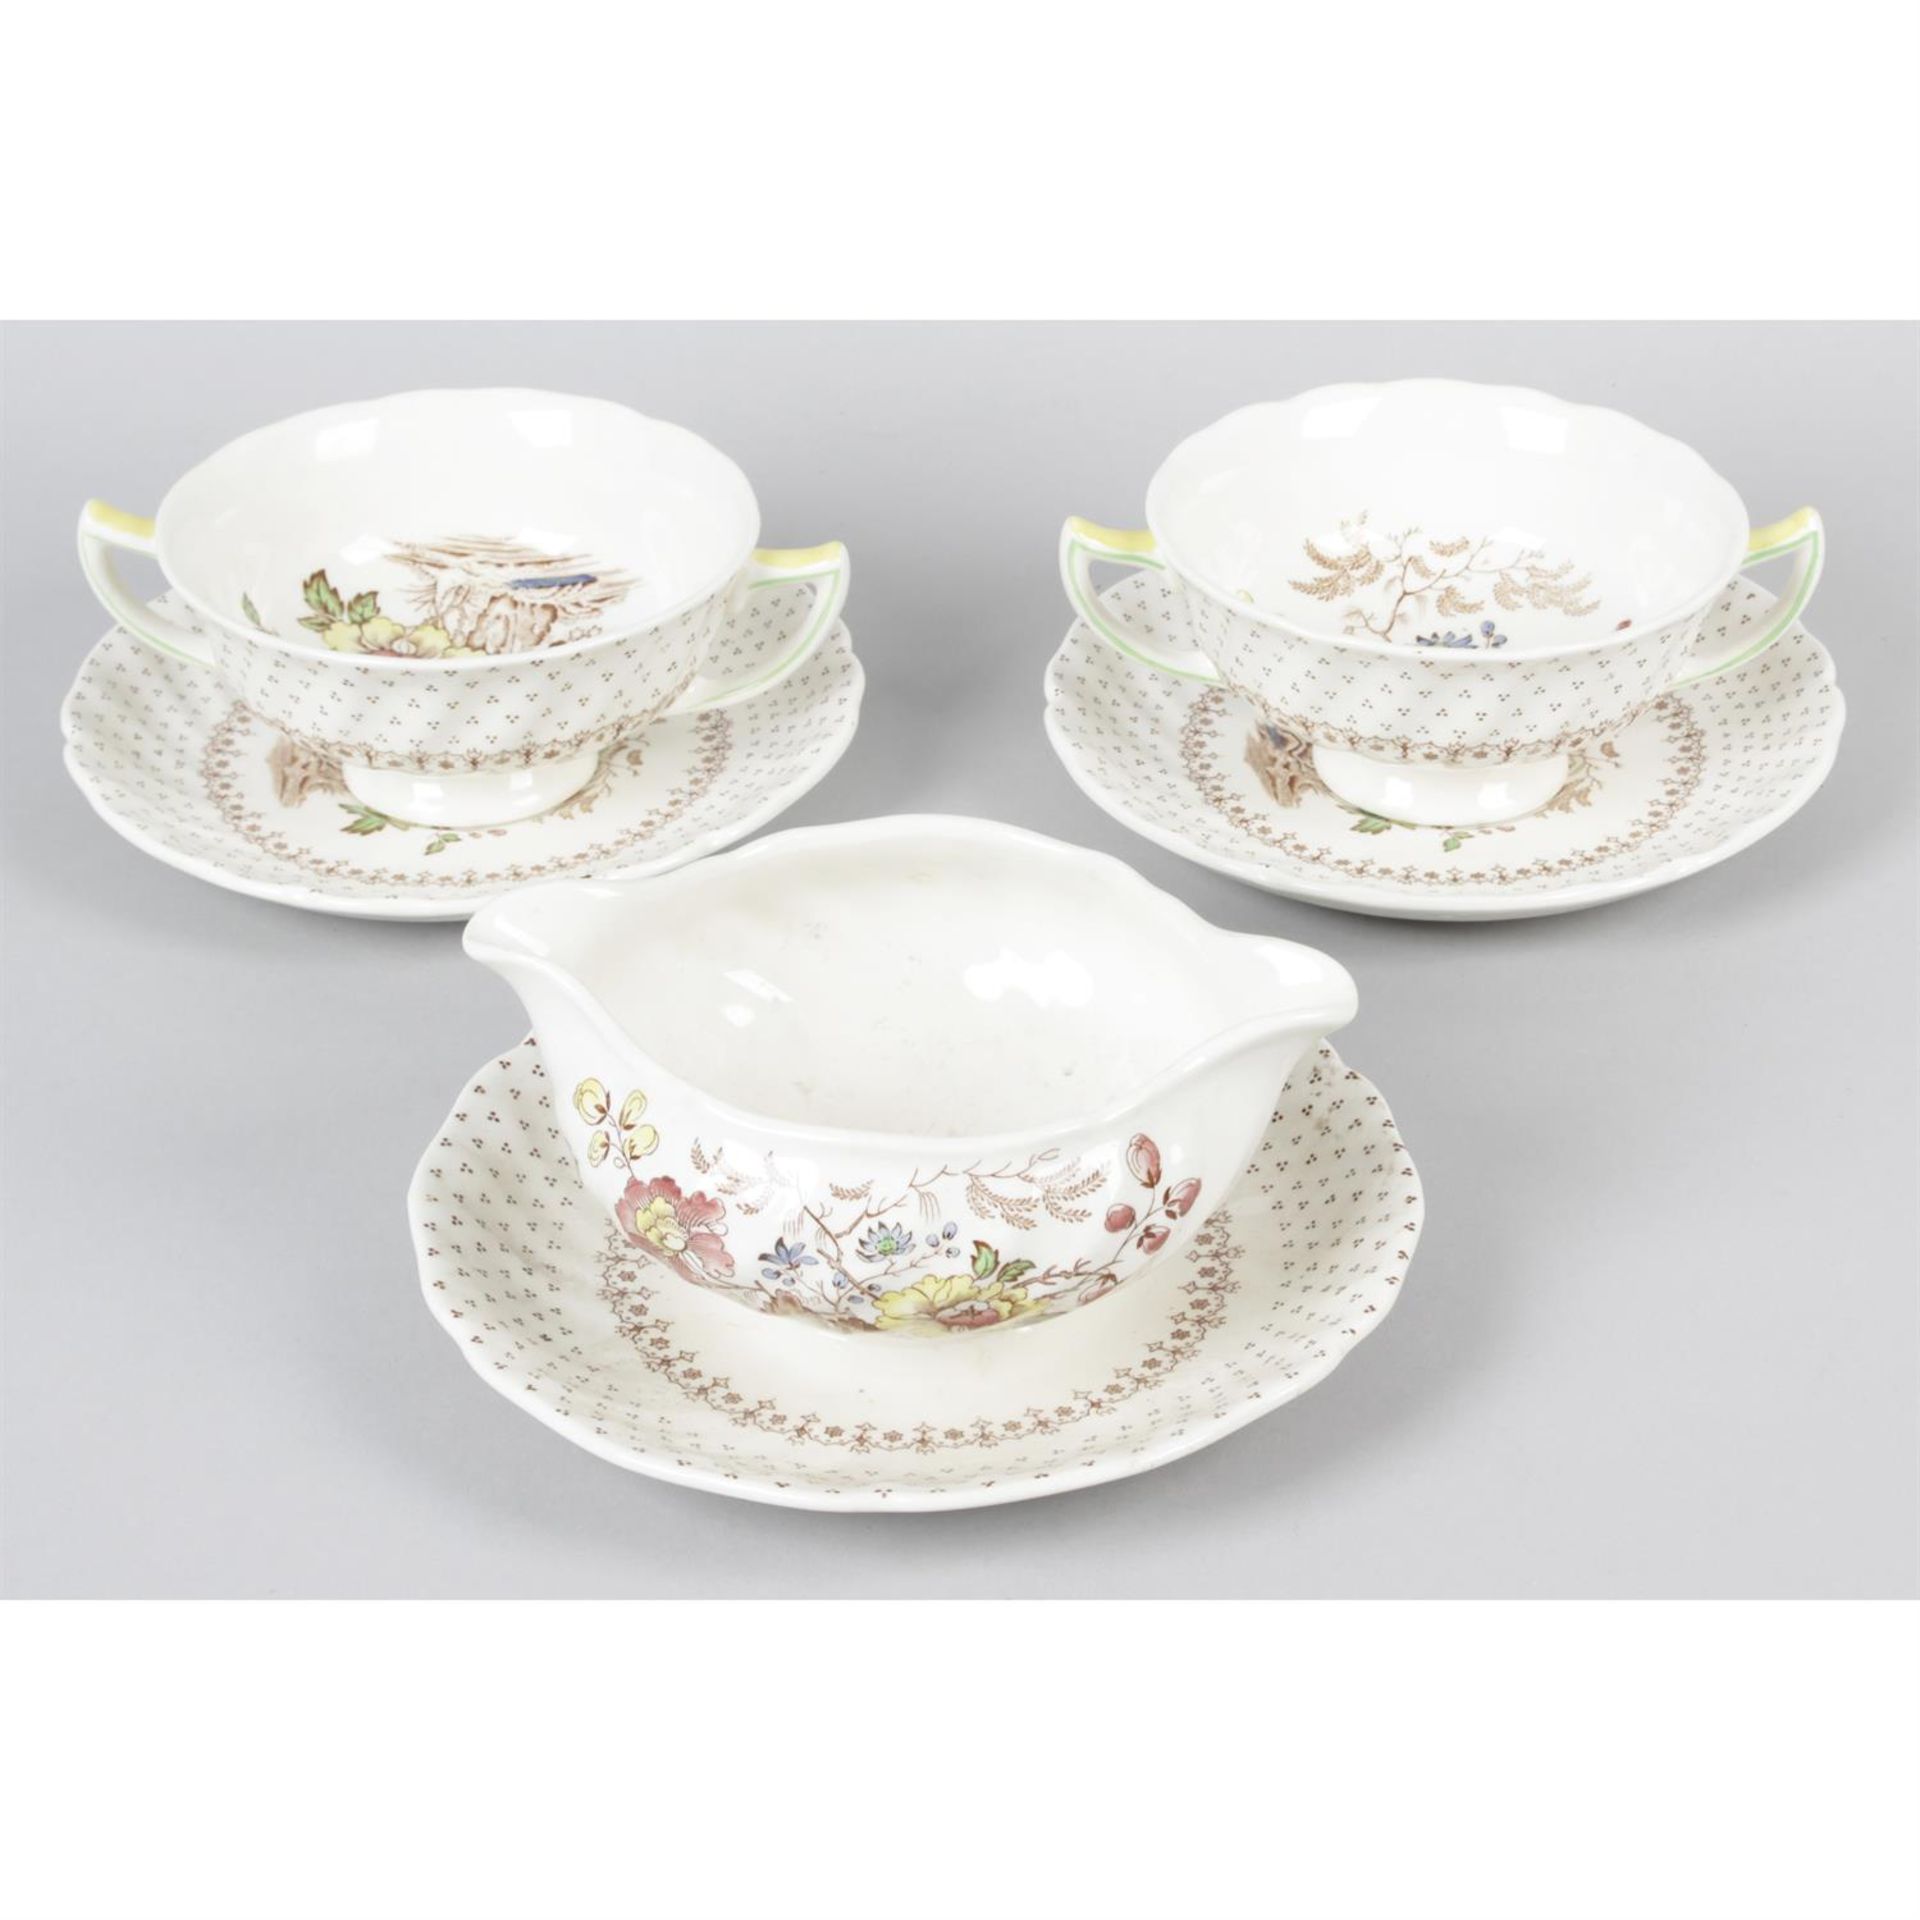 A selection of Royal Doulton 'Grantham' pattern table ware.